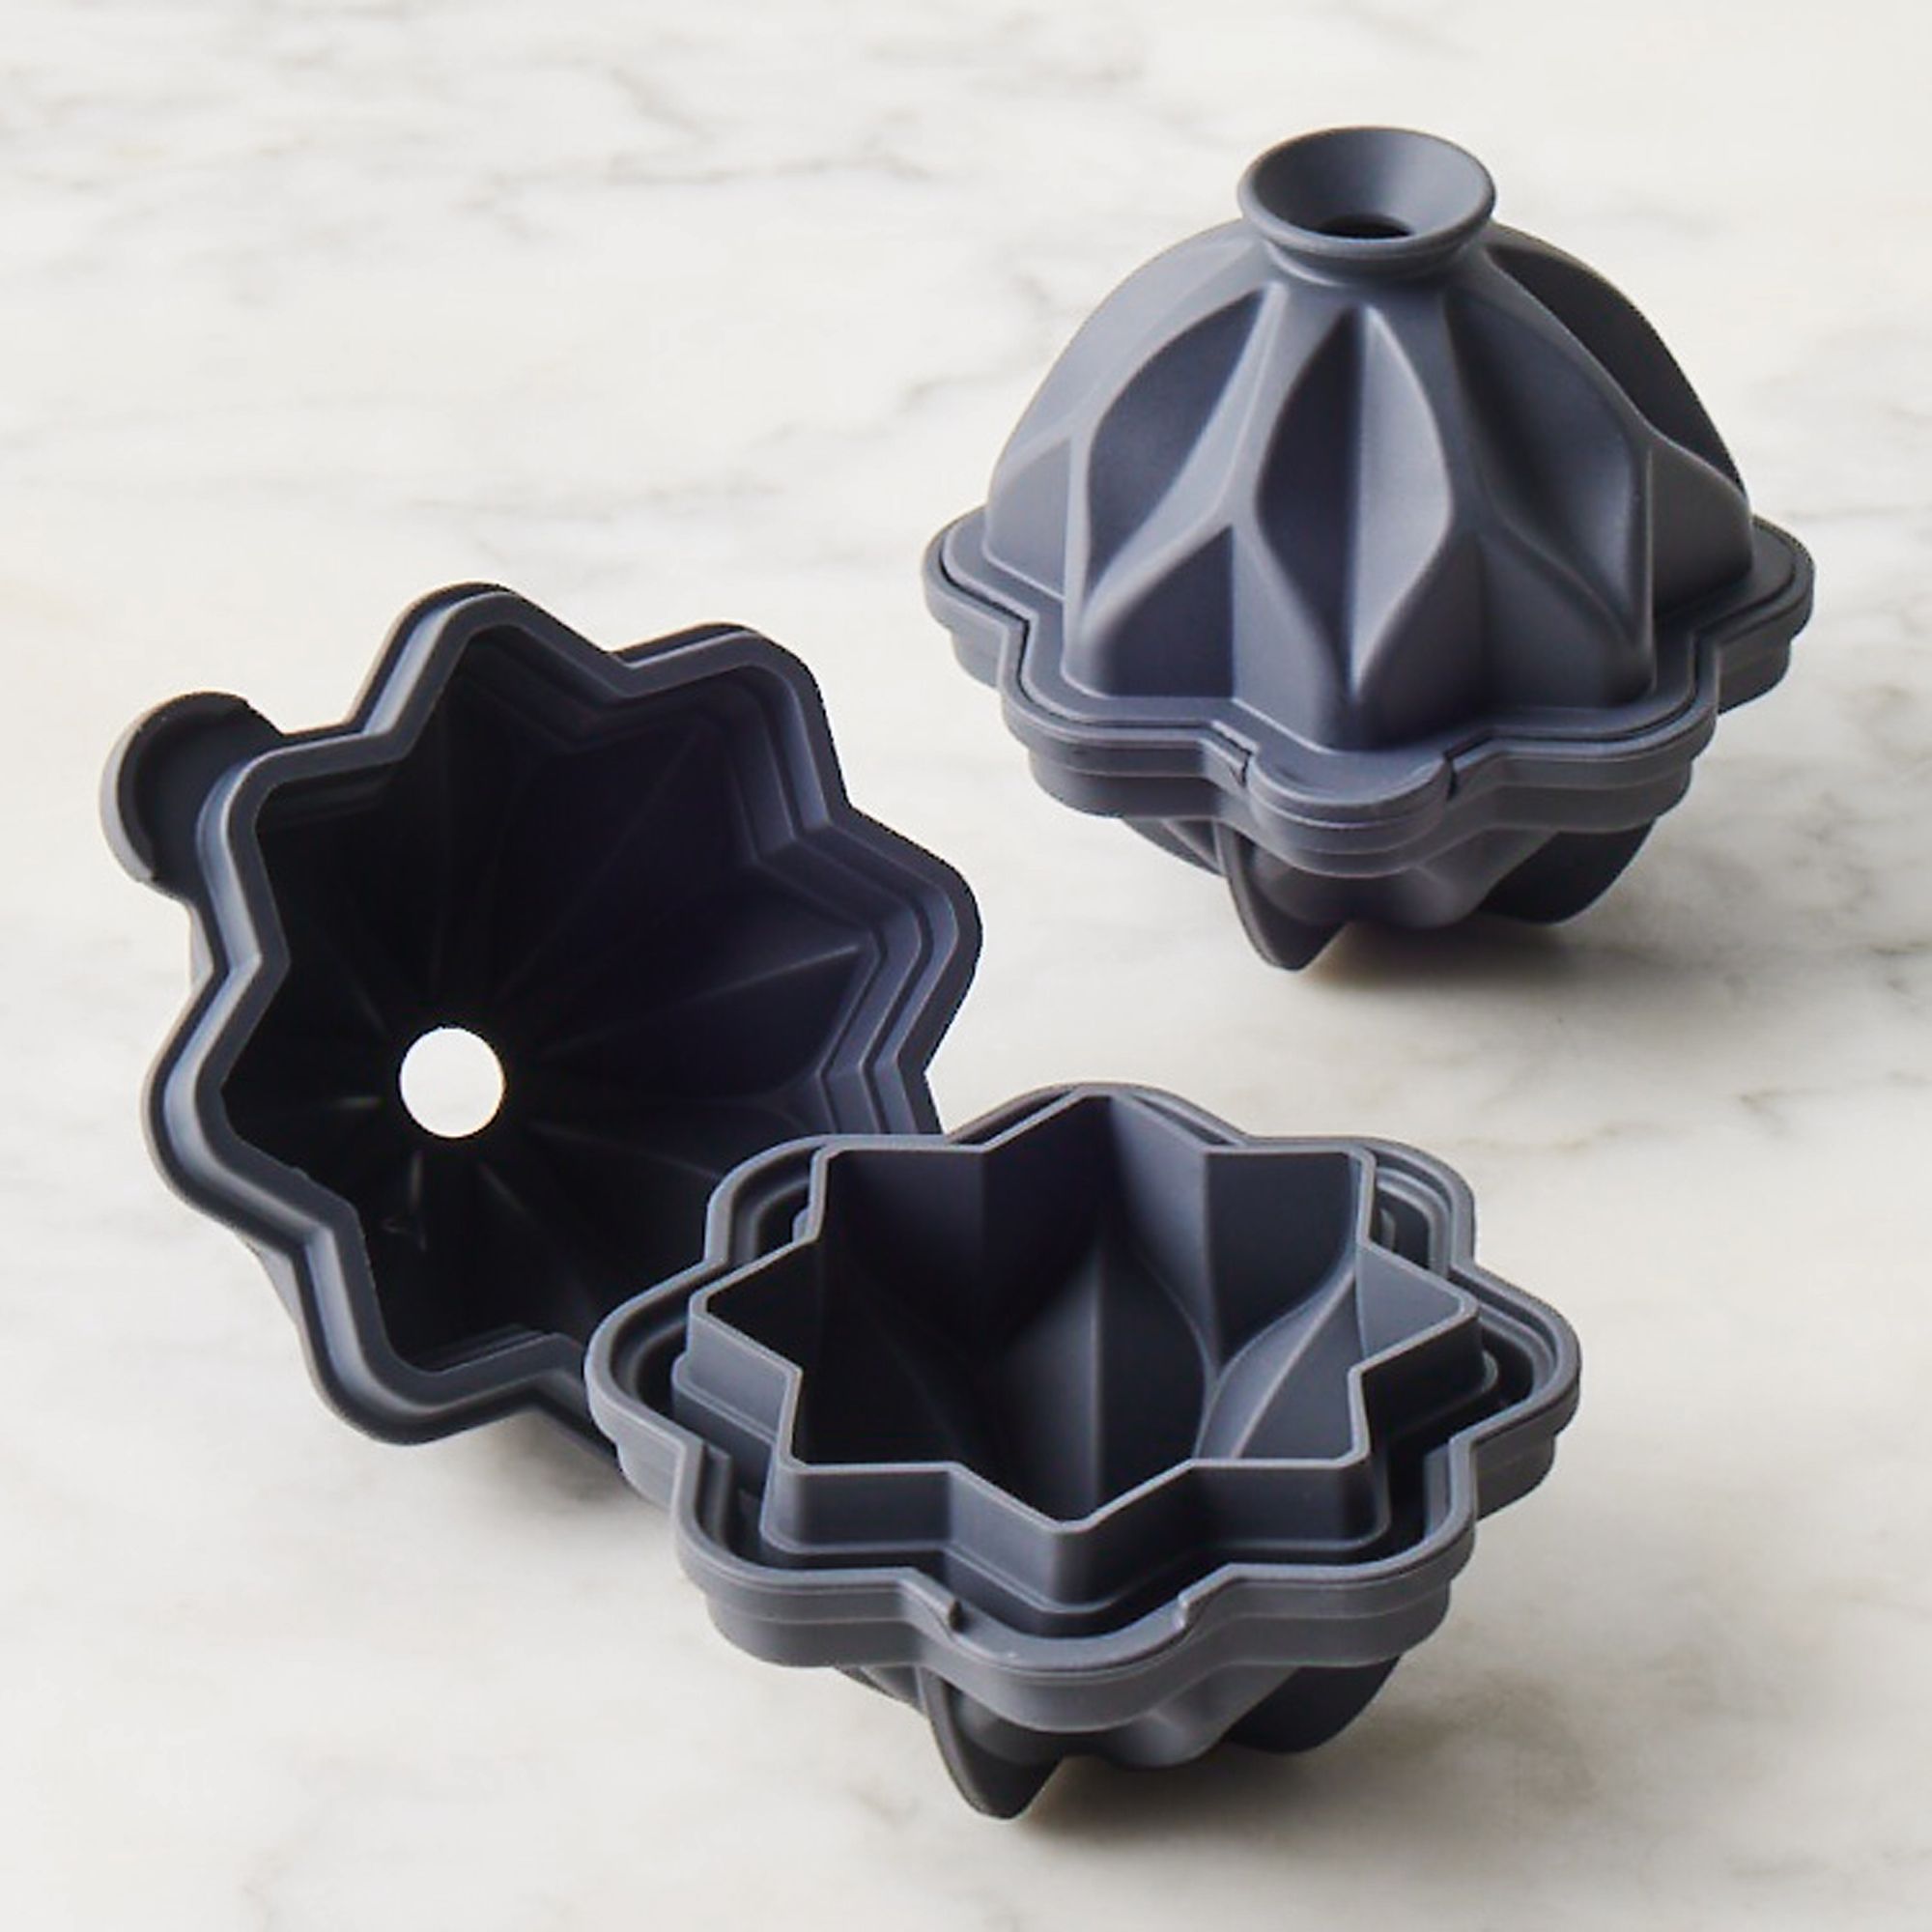 W&P Ripple Cocktail Ice Mold, Set of 2, Food-Grade Silicone on Food52